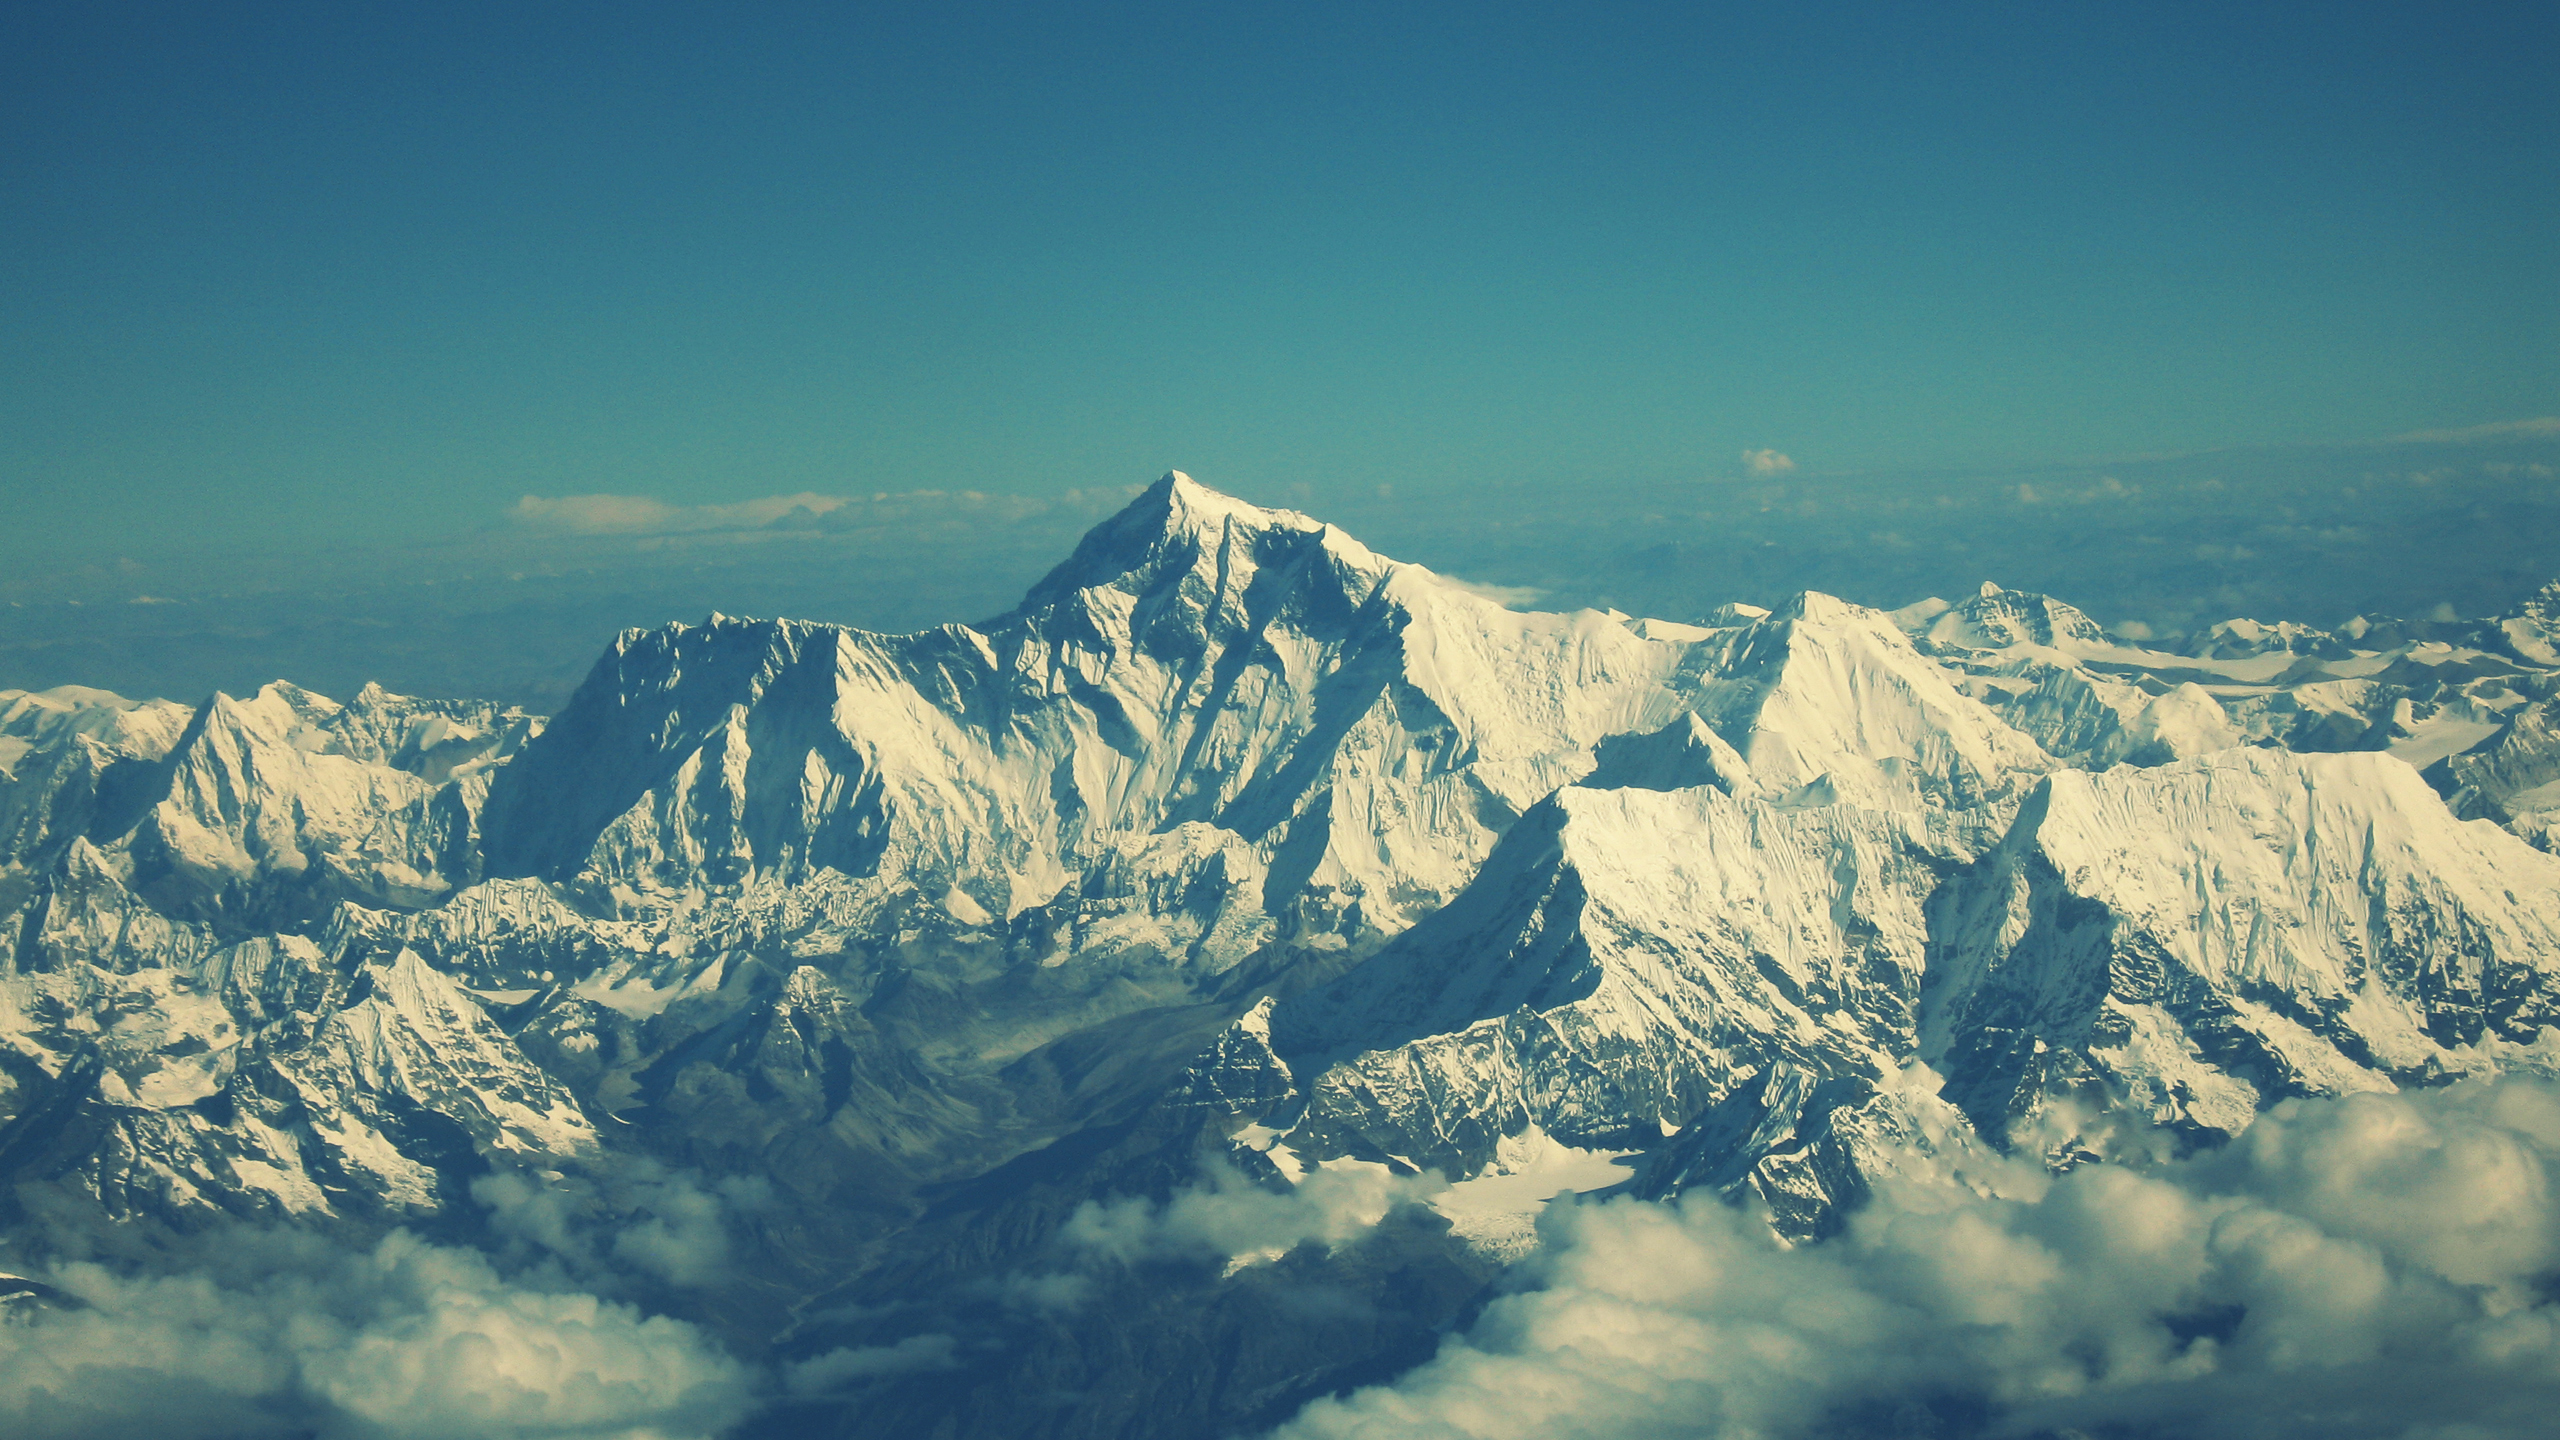 General 2560x1440 winter mountains sky clouds landscape snow nature Himalayas Nepal Mount Everest